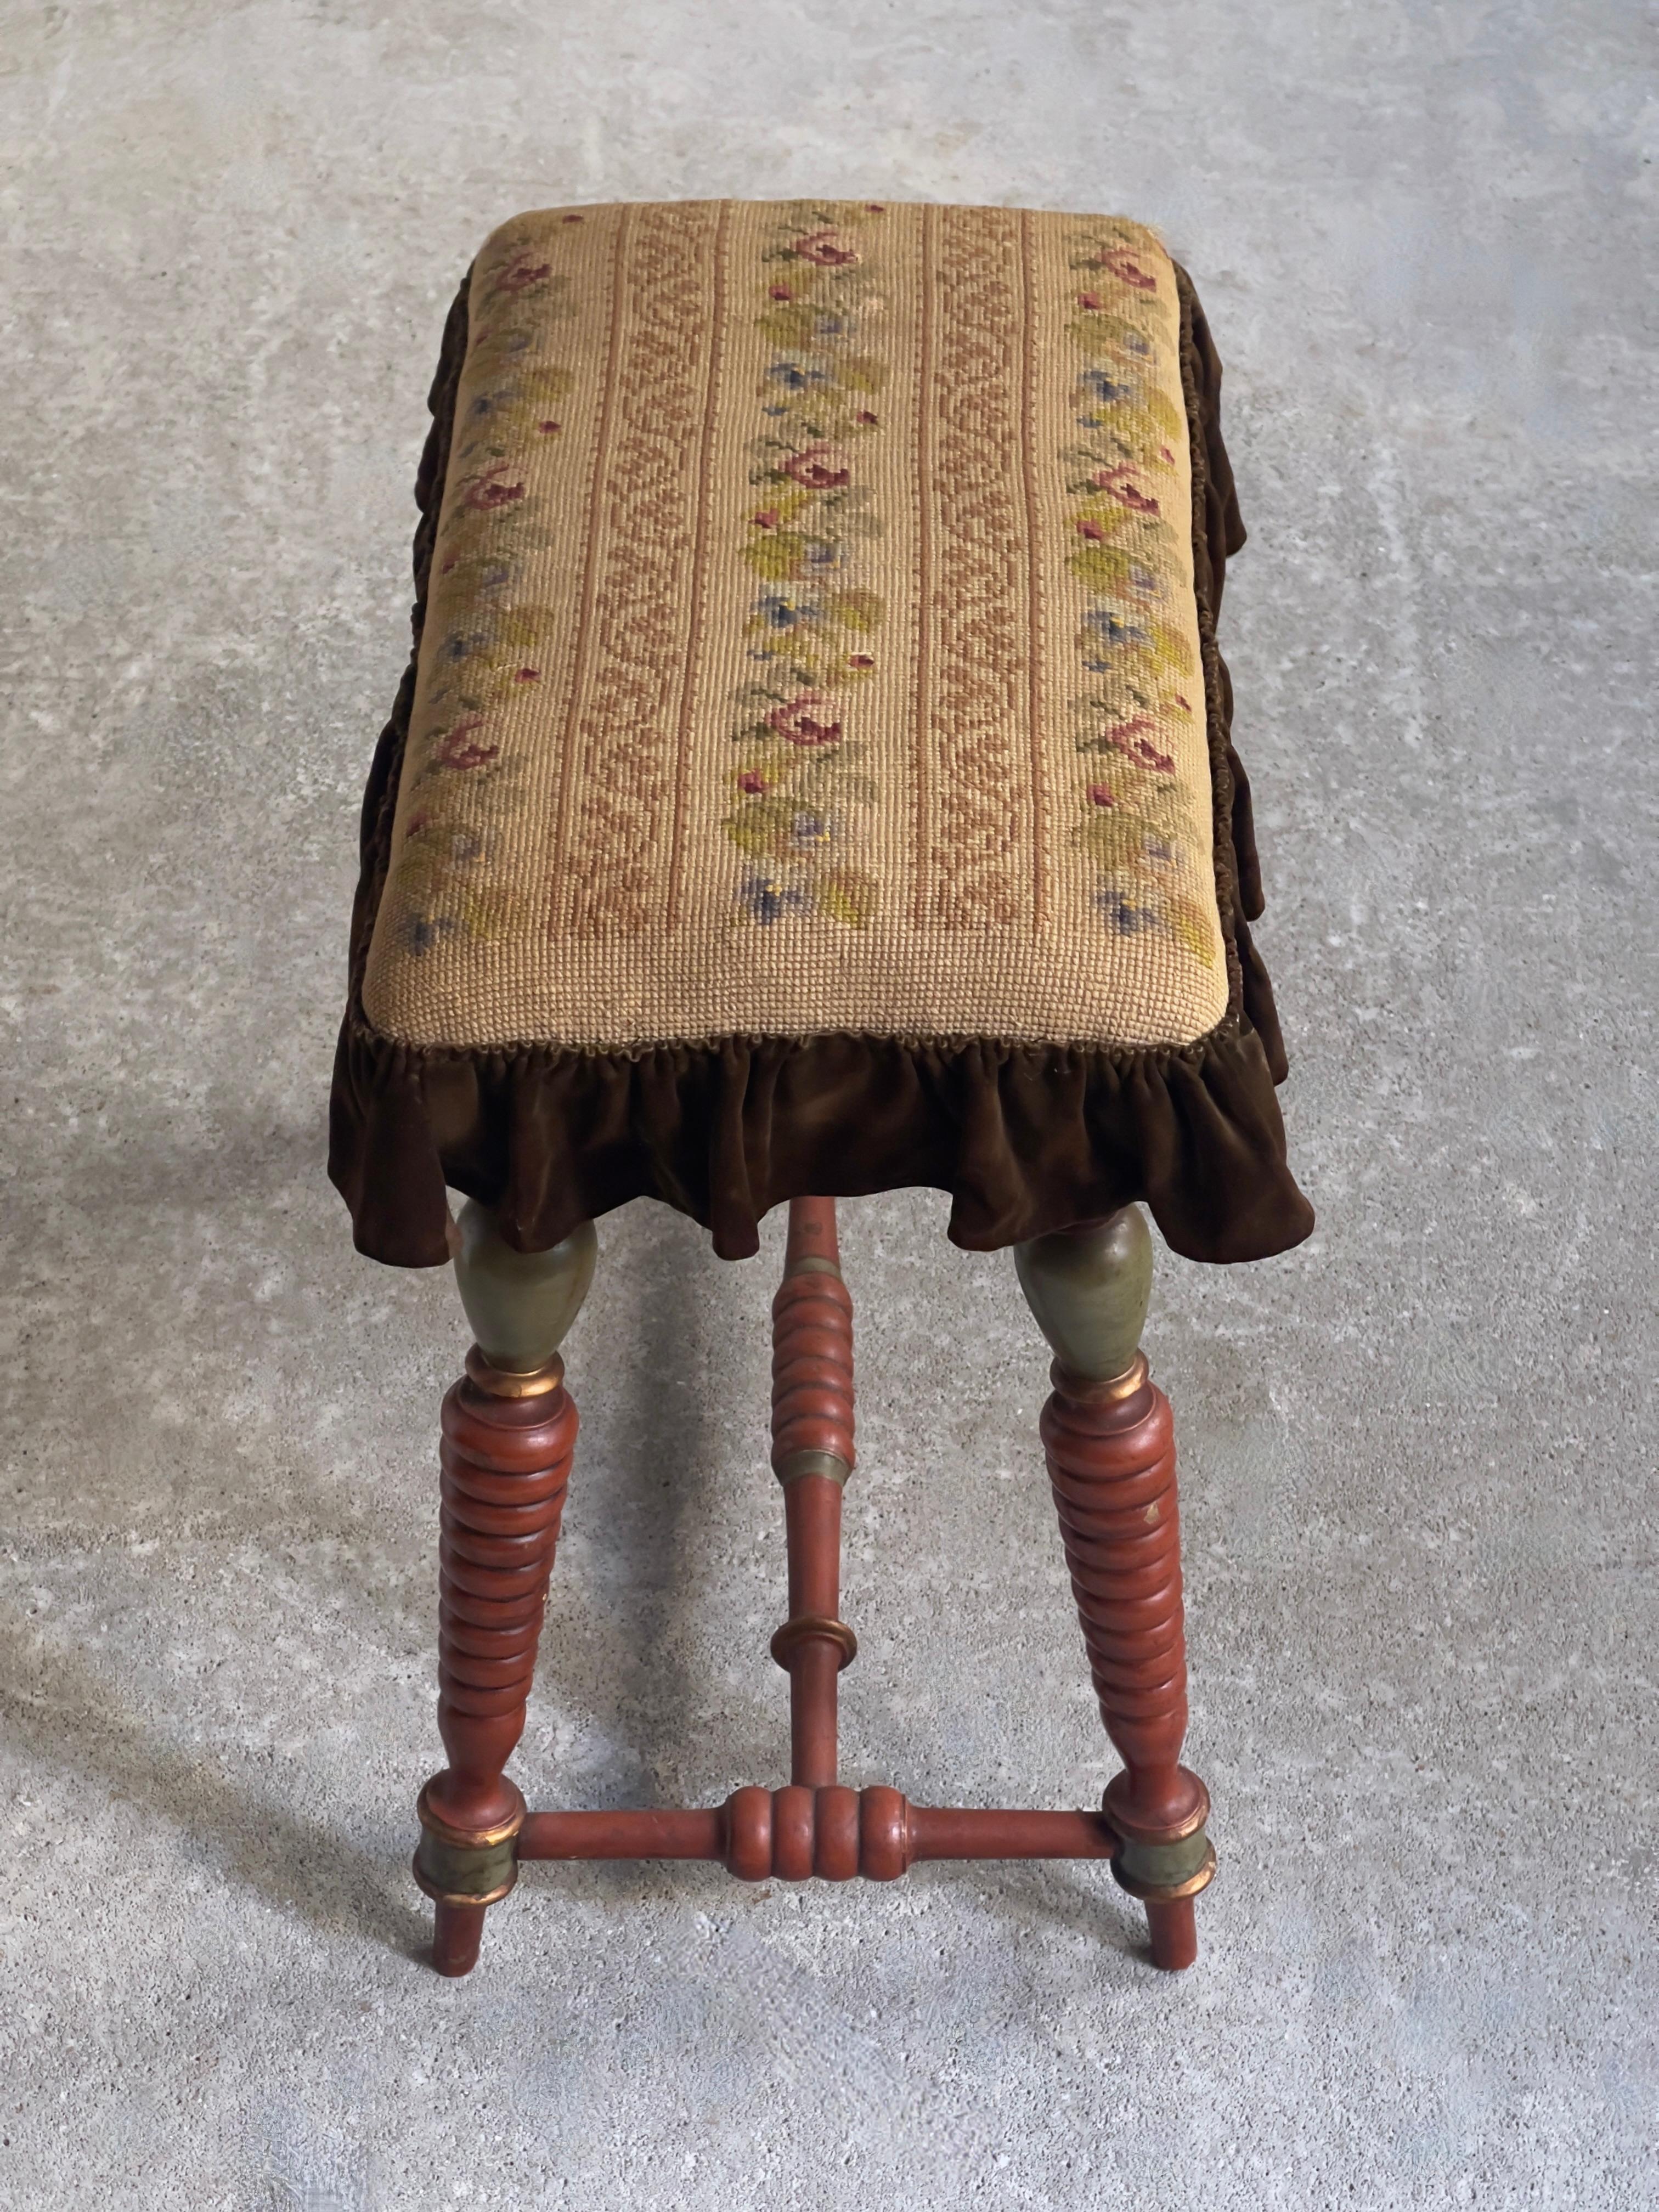 Wood Danish Late 19th century Stool with carved painted legs and embroidered seat.